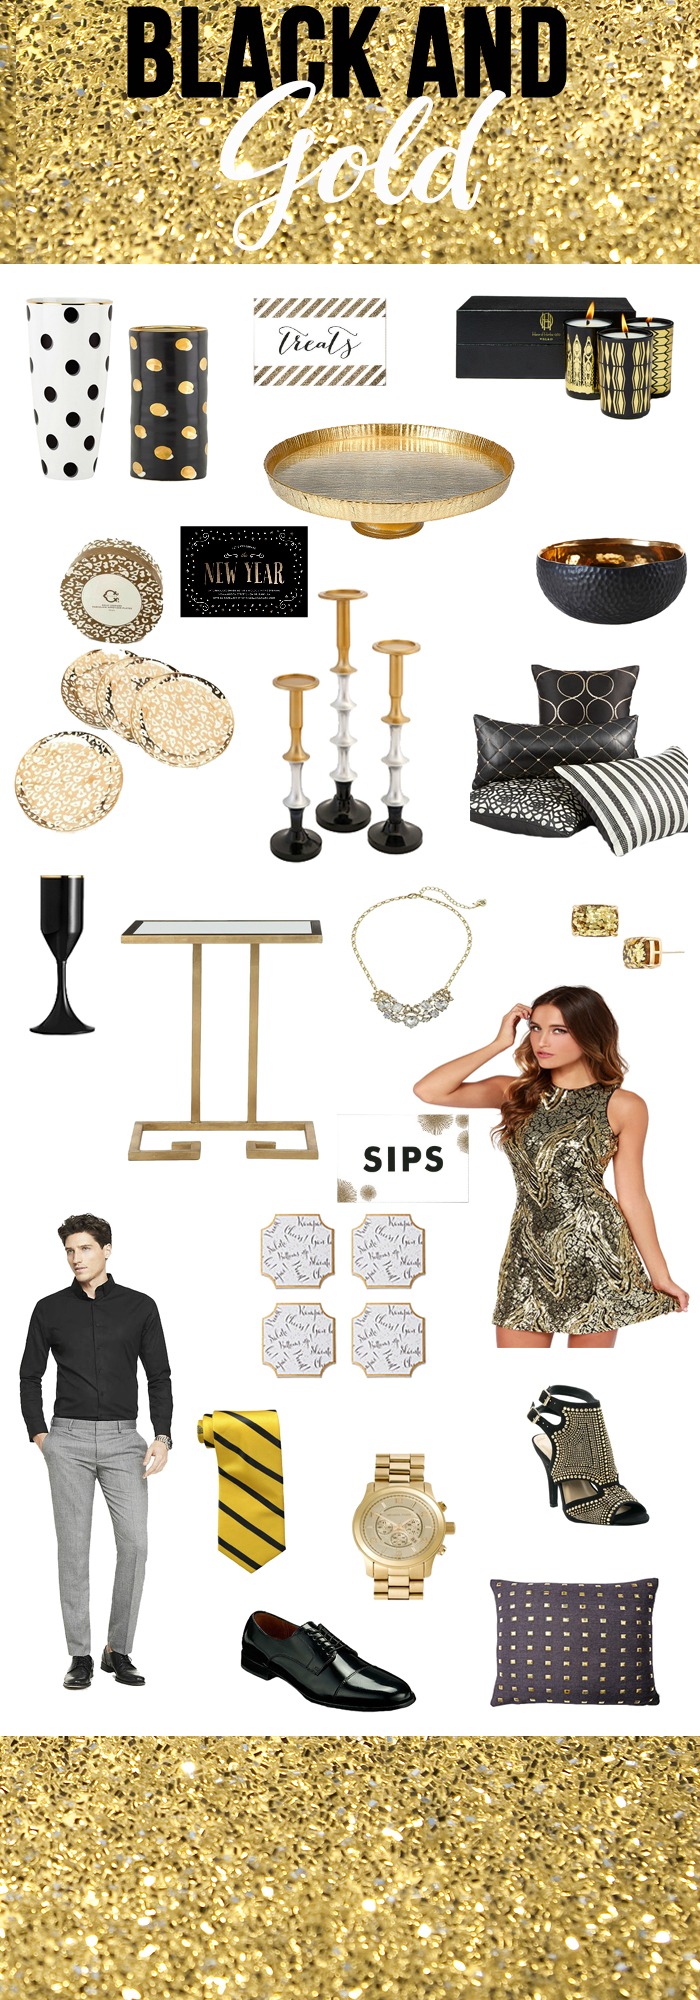 Looking for a fun NYE Party Idea? How about a Black and Gold Themed NYE?